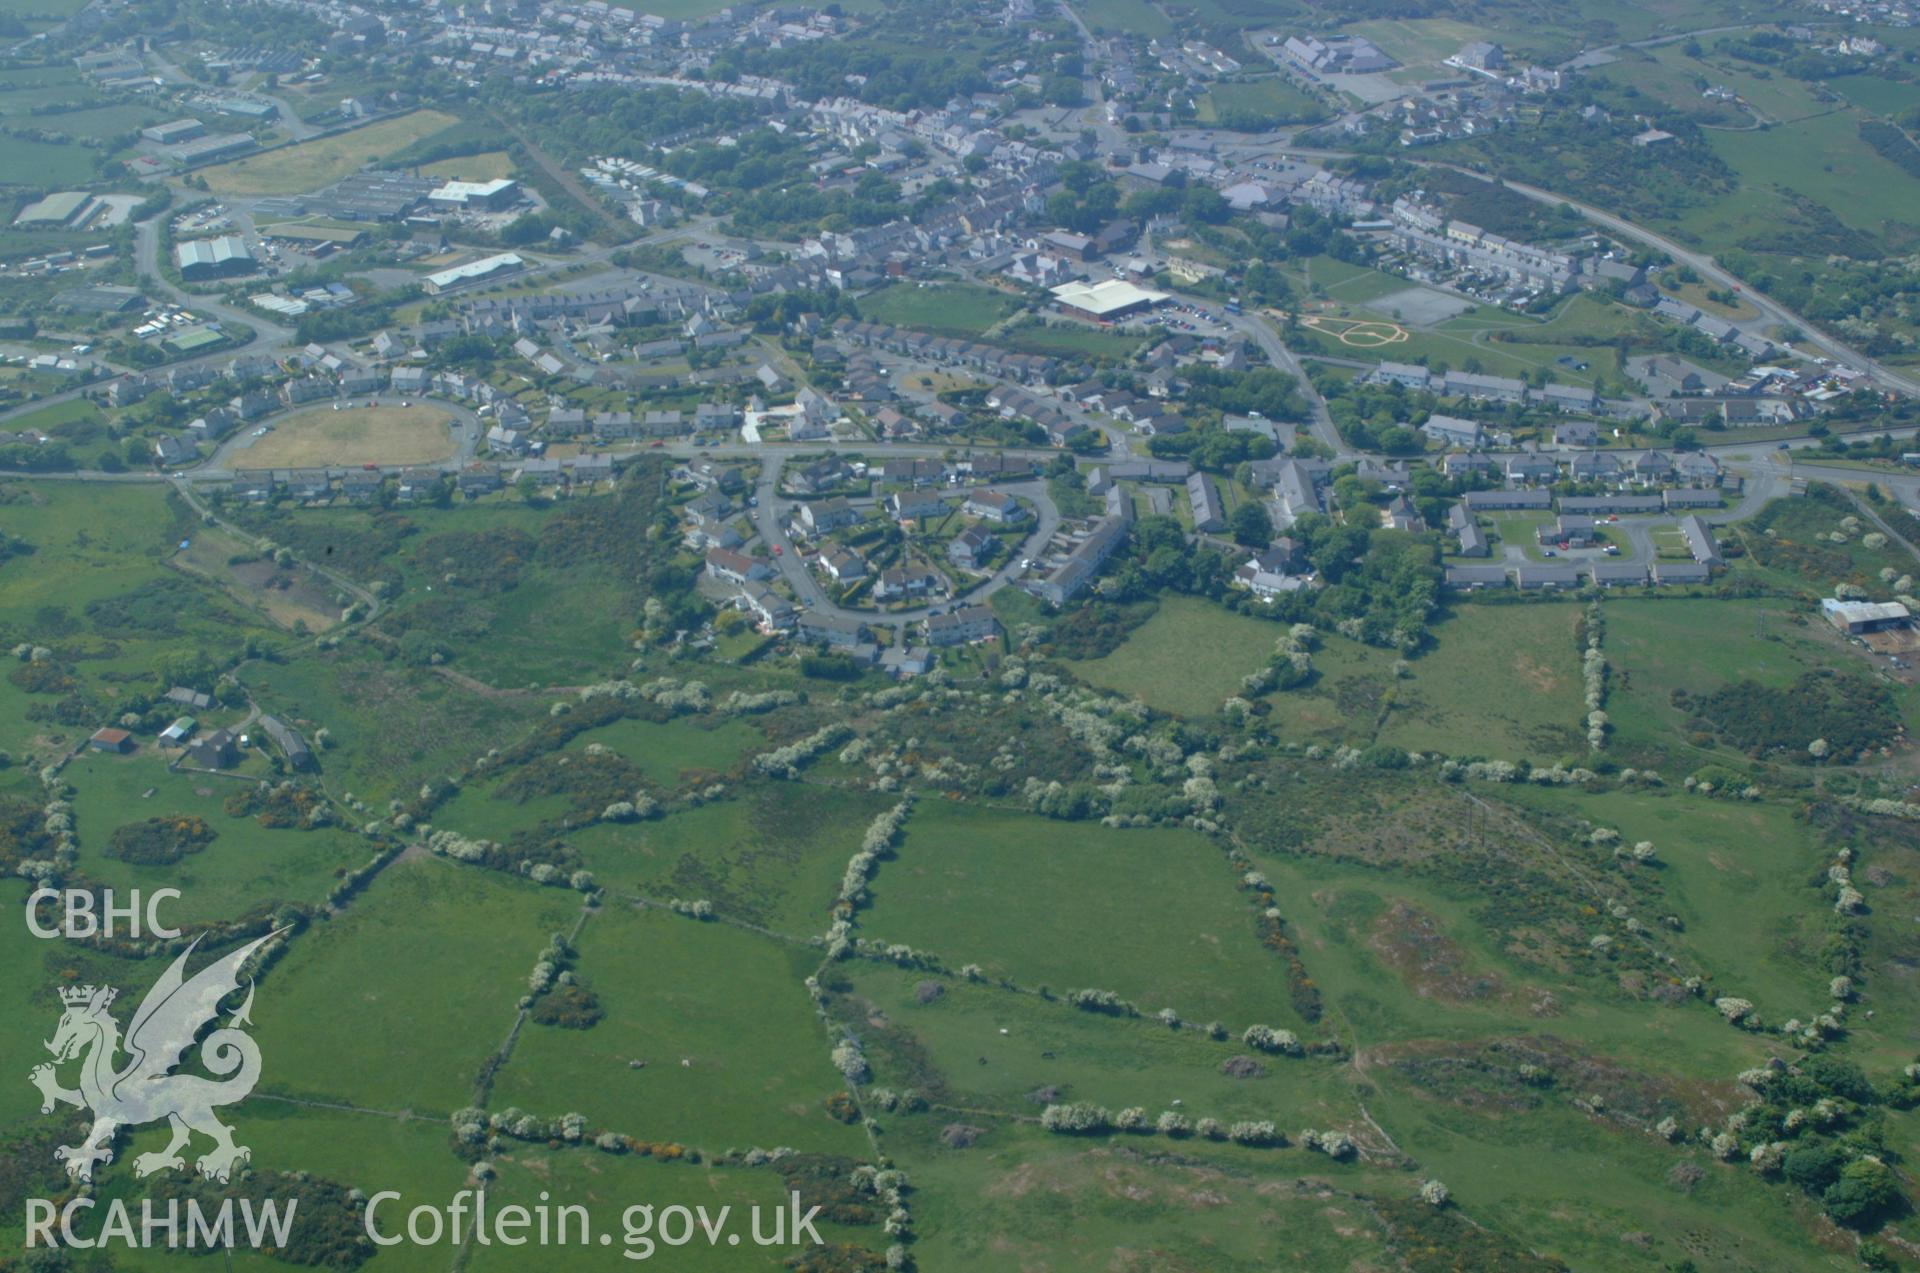 RCAHMW colour oblique aerial photograph of Amlwch. Taken on 26 May 2004 by Toby Driver